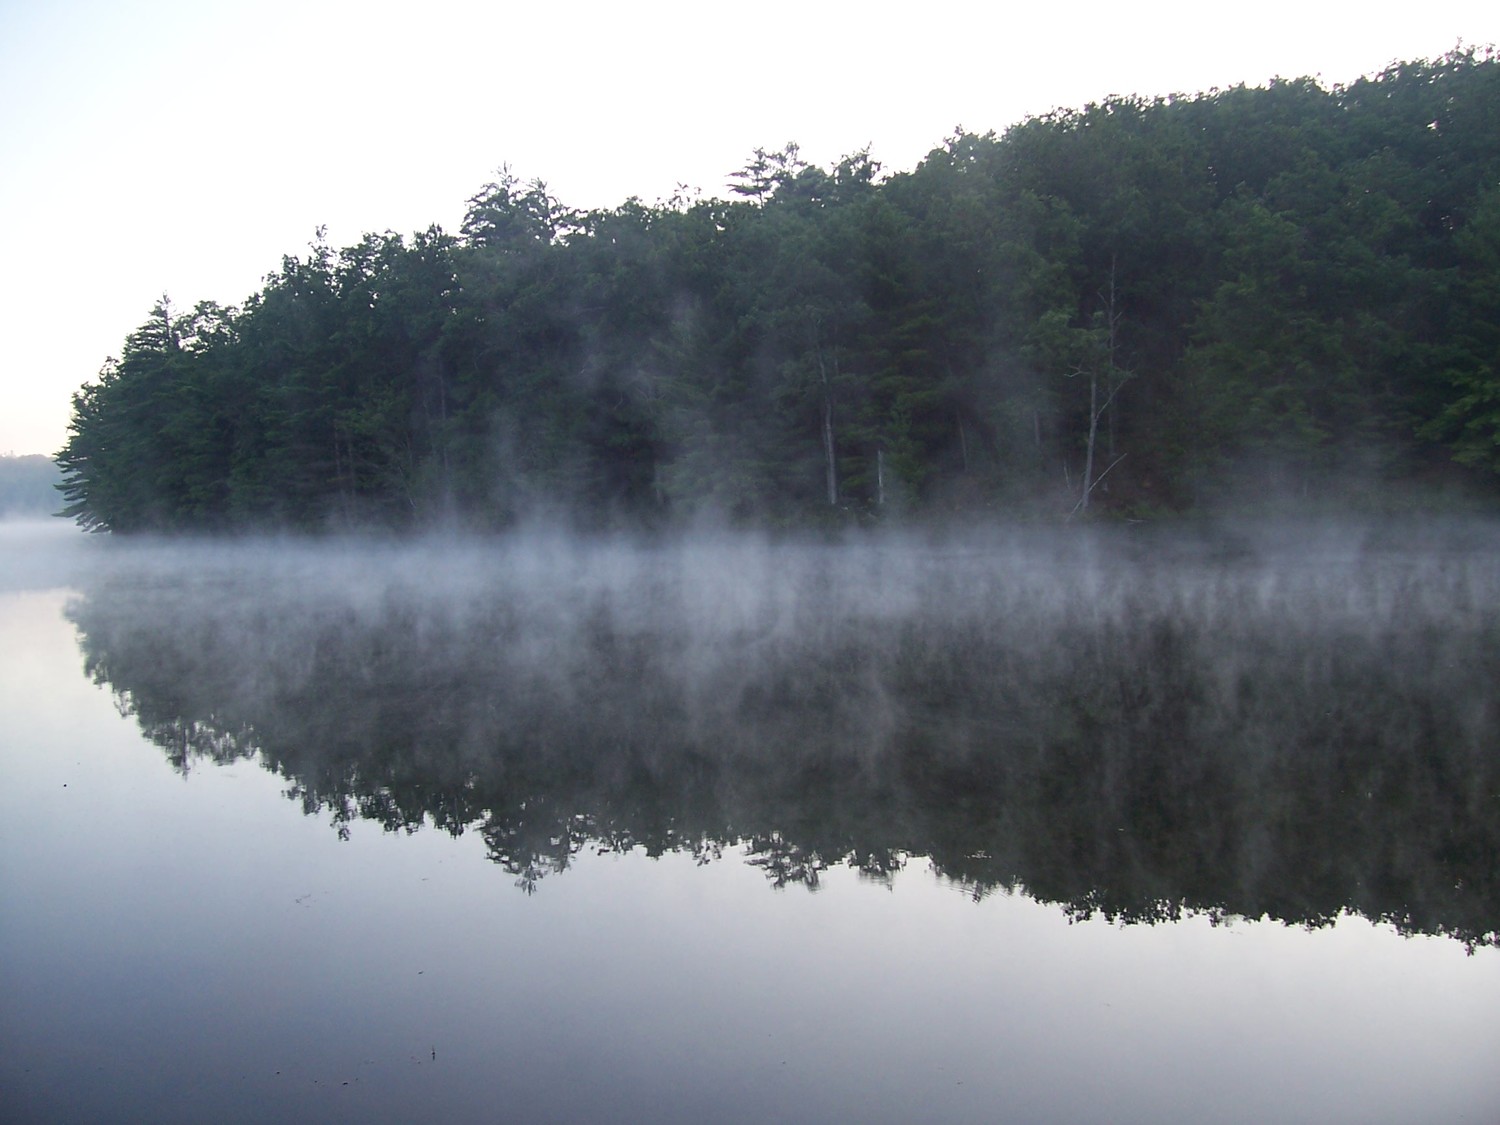 Early morning mist on Lake Wolverine